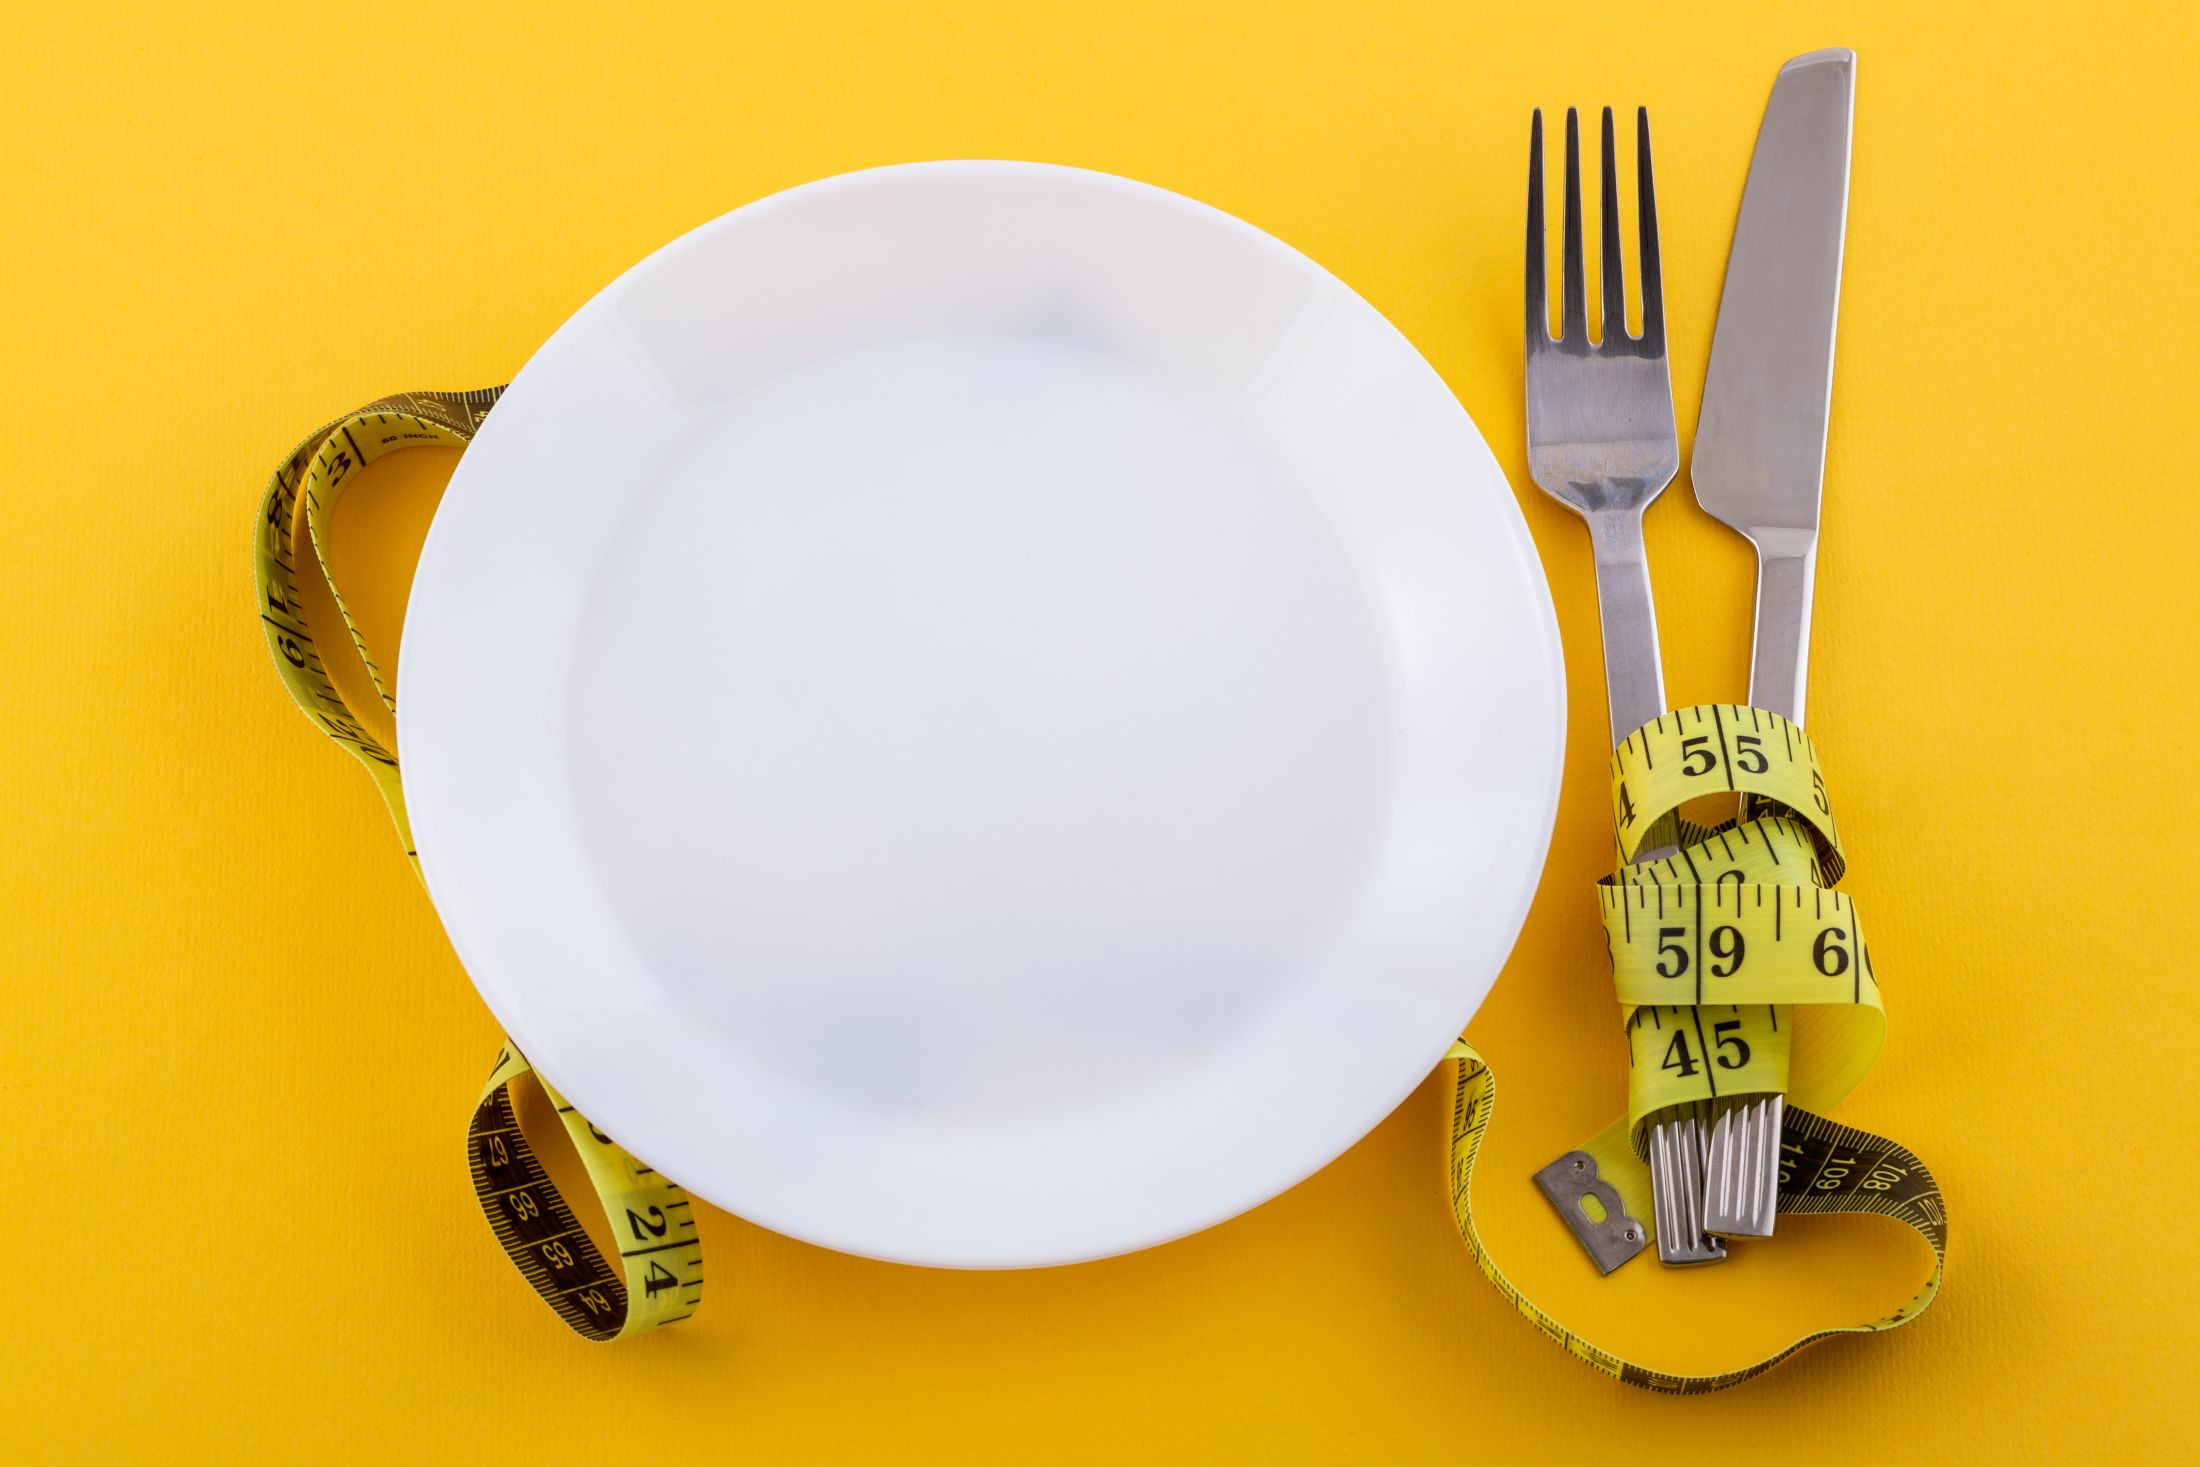 cutlery-and-a-white-plate-with-measuring-tape-on-a-yellow-the-concept-of-weight-loss-and-diet.jpg